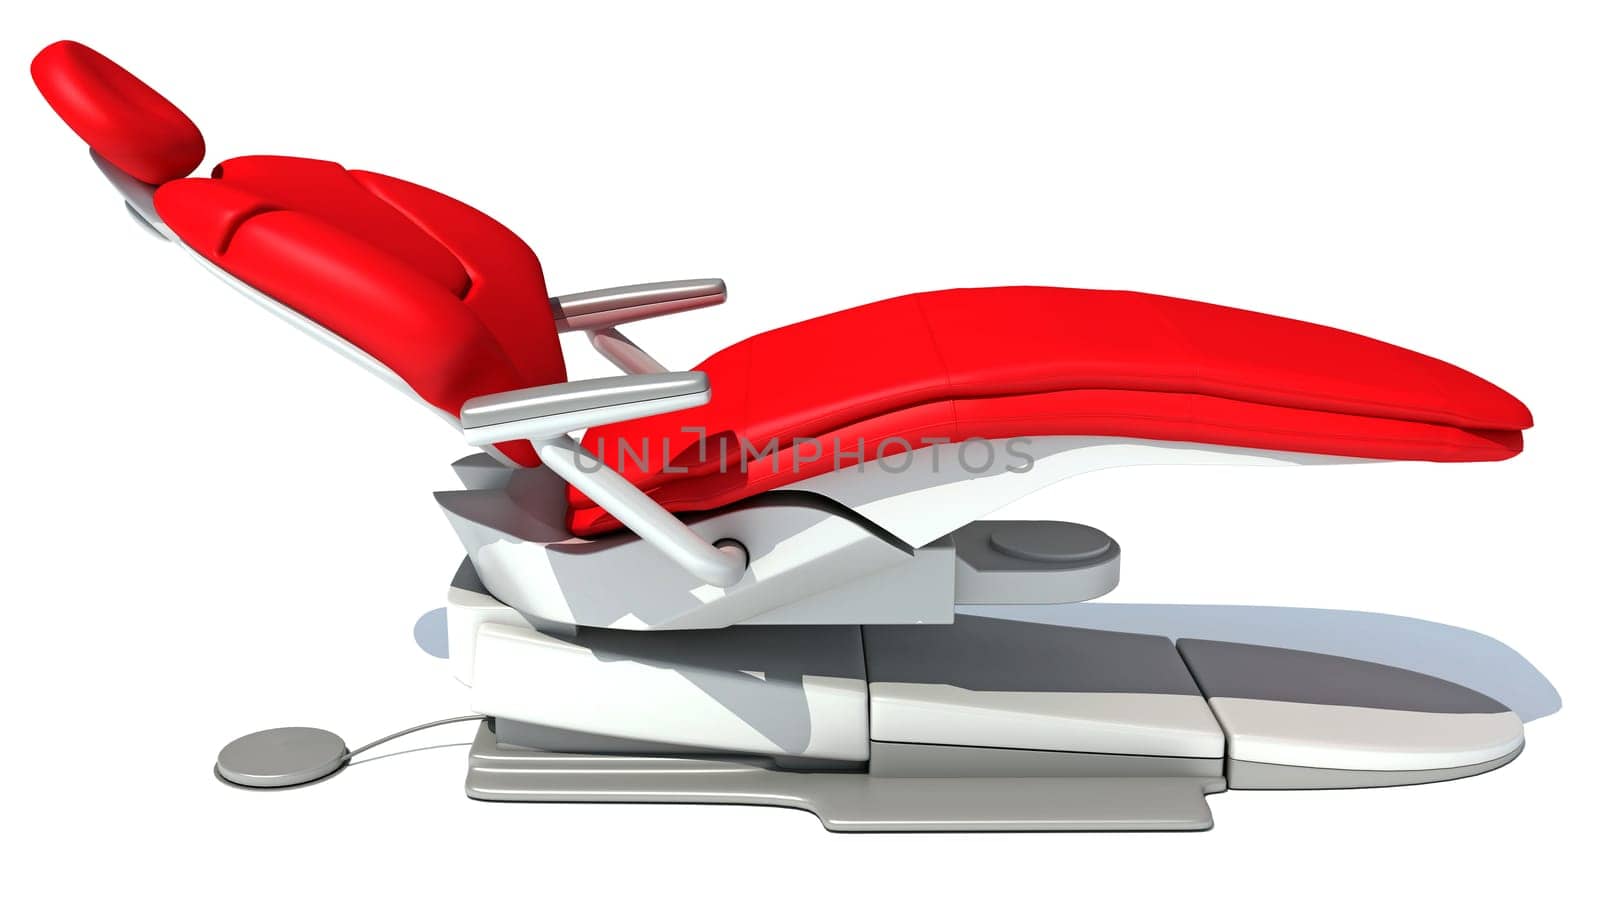 Dental treatment chair 3D rendering on white background by 3DHorse